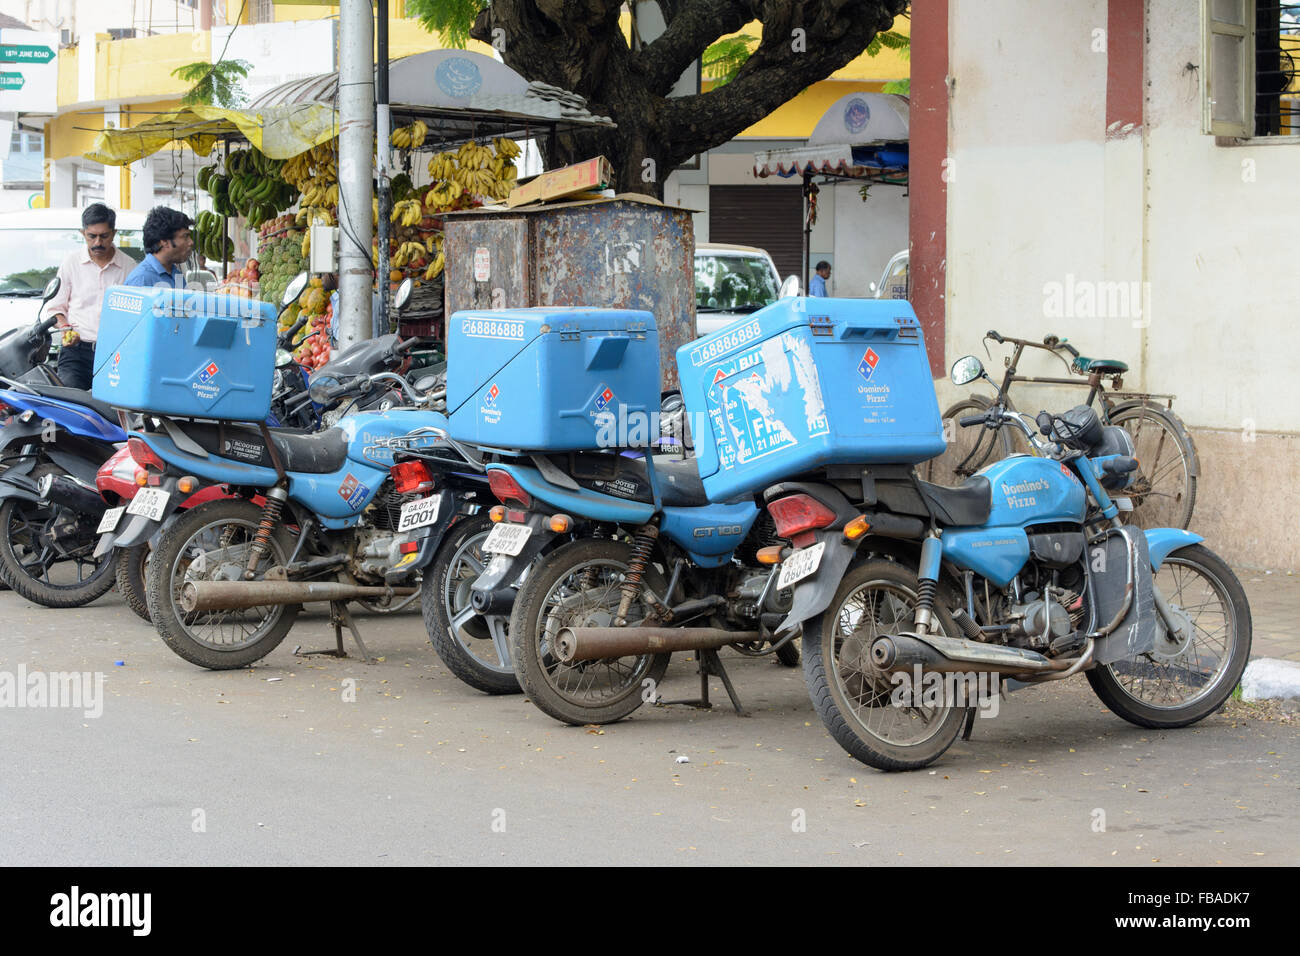 Domino's Pizza motorbikes parked next to a traditional fresh fruit stand in Panaji (Panjim), North Goa, India Stock Photo